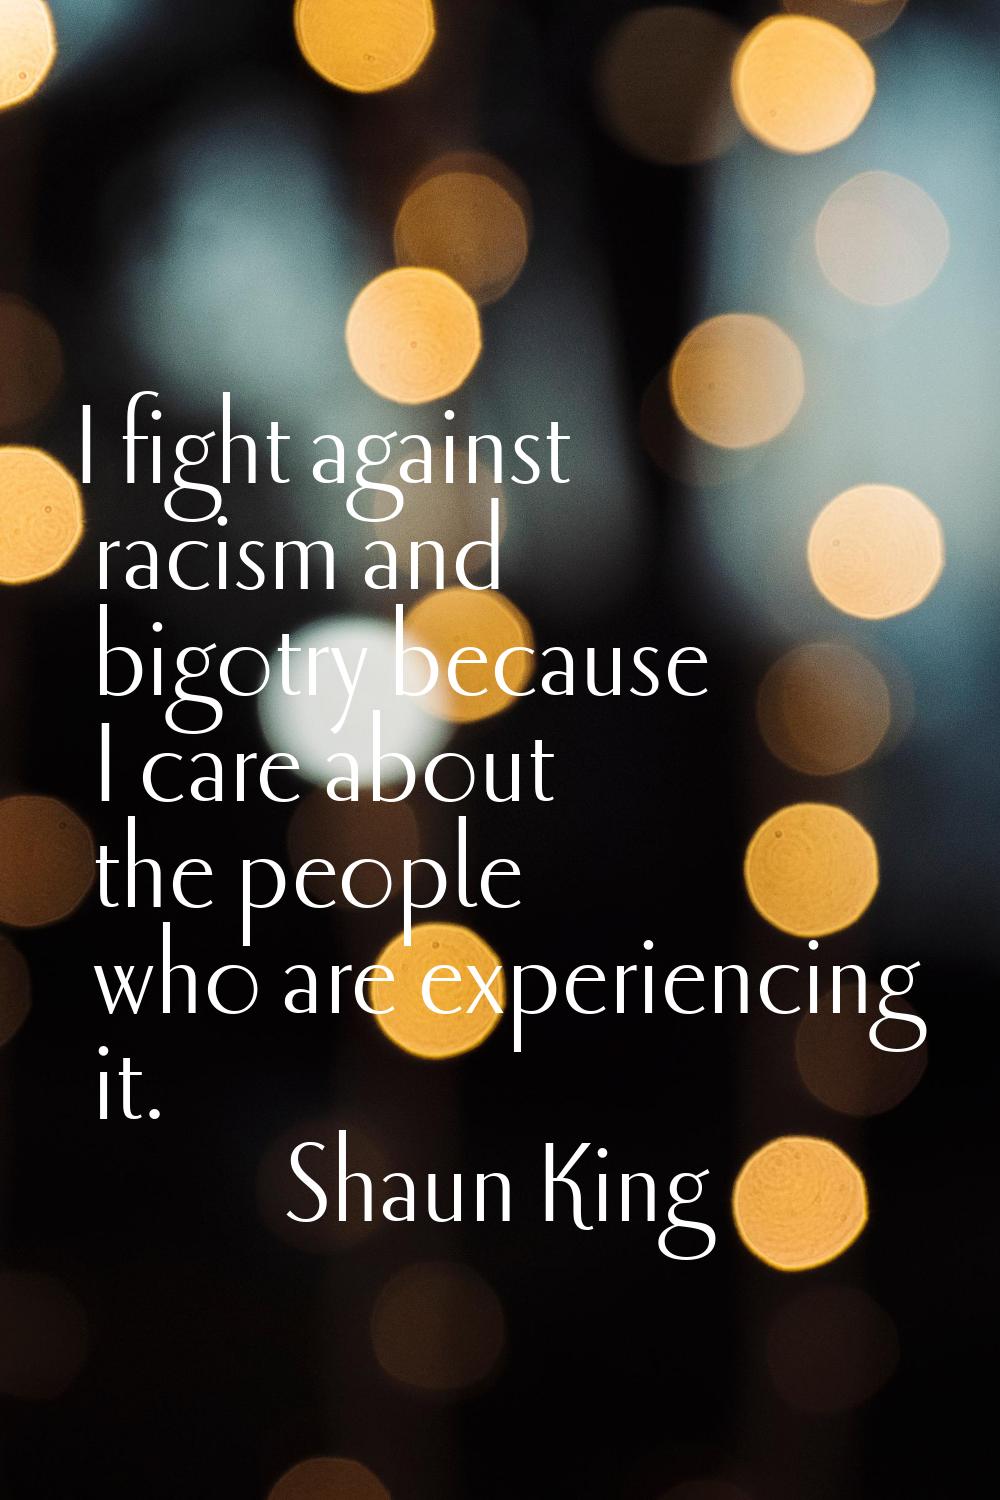 I fight against racism and bigotry because I care about the people who are experiencing it.